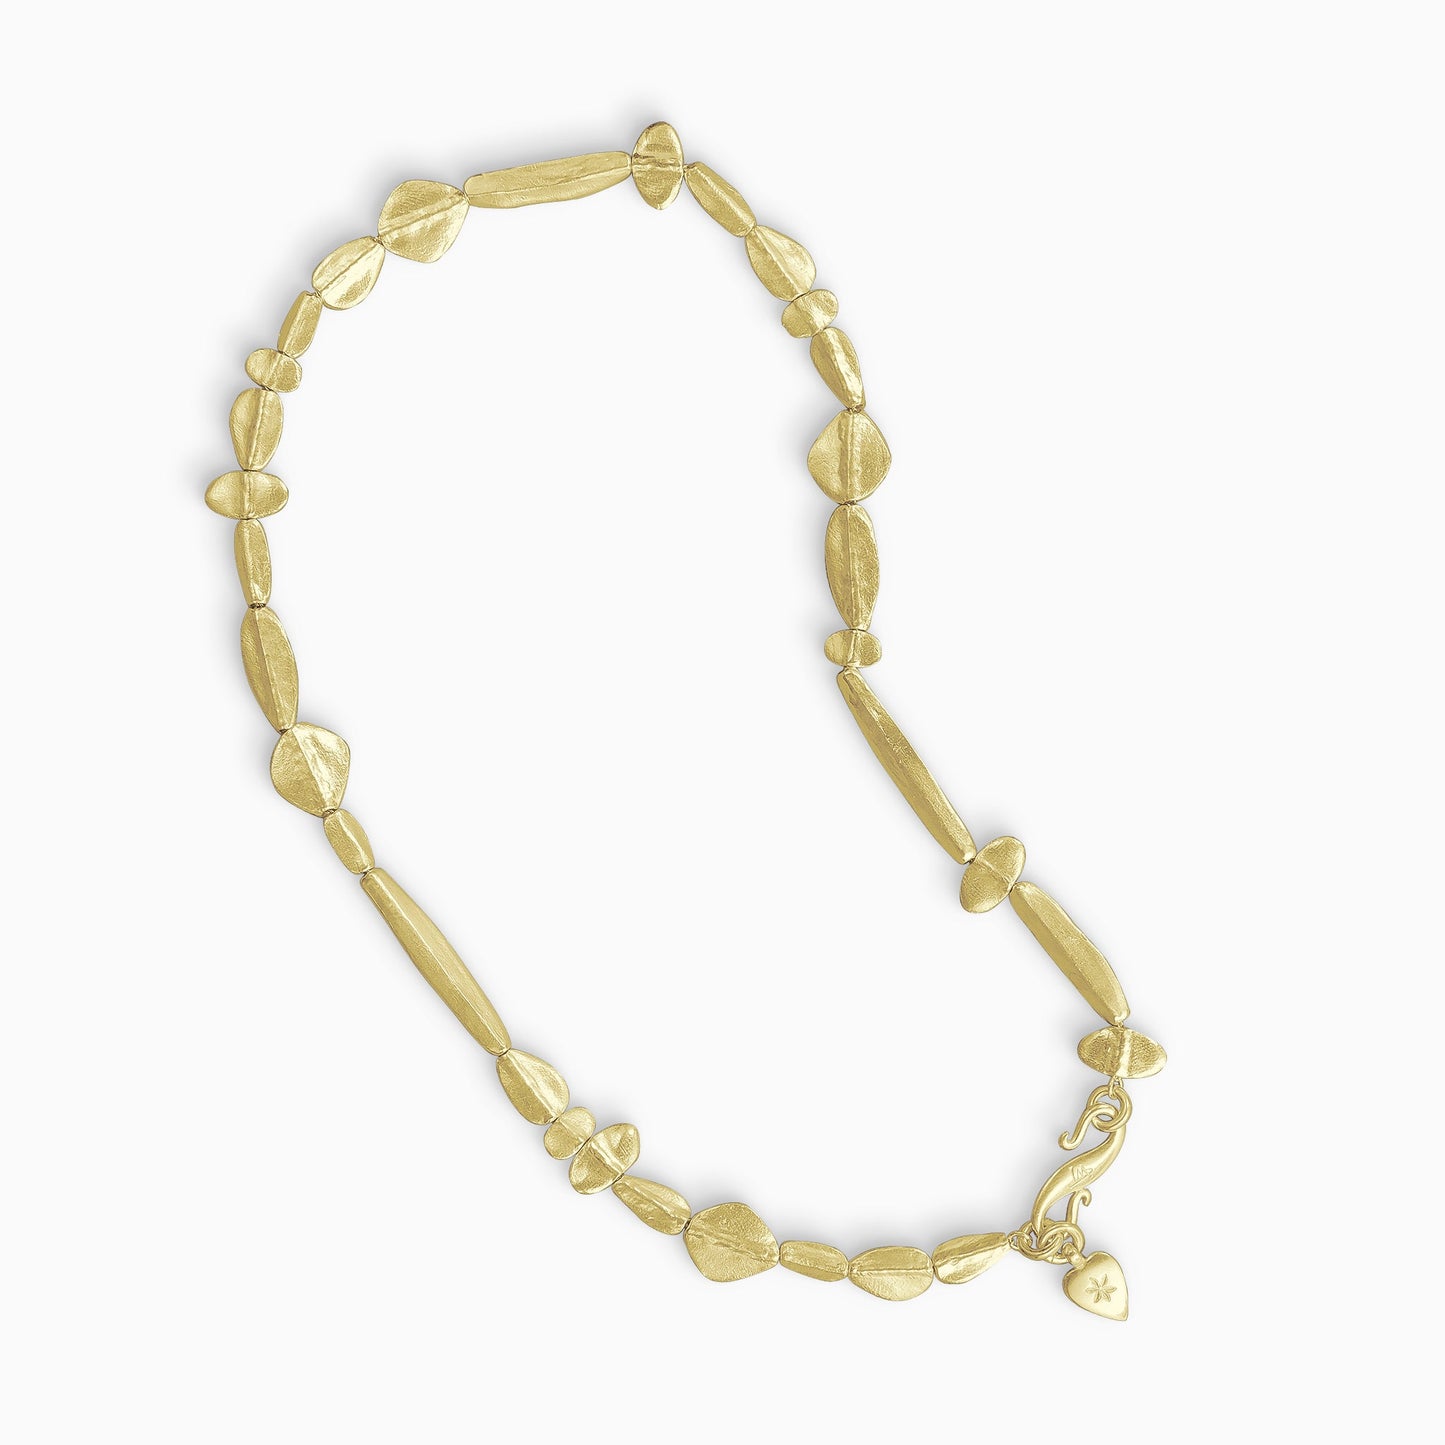 A necklace of 18ct Fairtrade yellow gold handmade solid beads reminiscent of the shape of seeds. These vary in size from 6mm x 9mm to 35mm x 13mm and are randomly arranged. The length of the necklace is 45cm. Each bead has a raised section through the centre and tapers out to the edges. Organic and textured, the Calliope beads sit fairly flat to the neck.